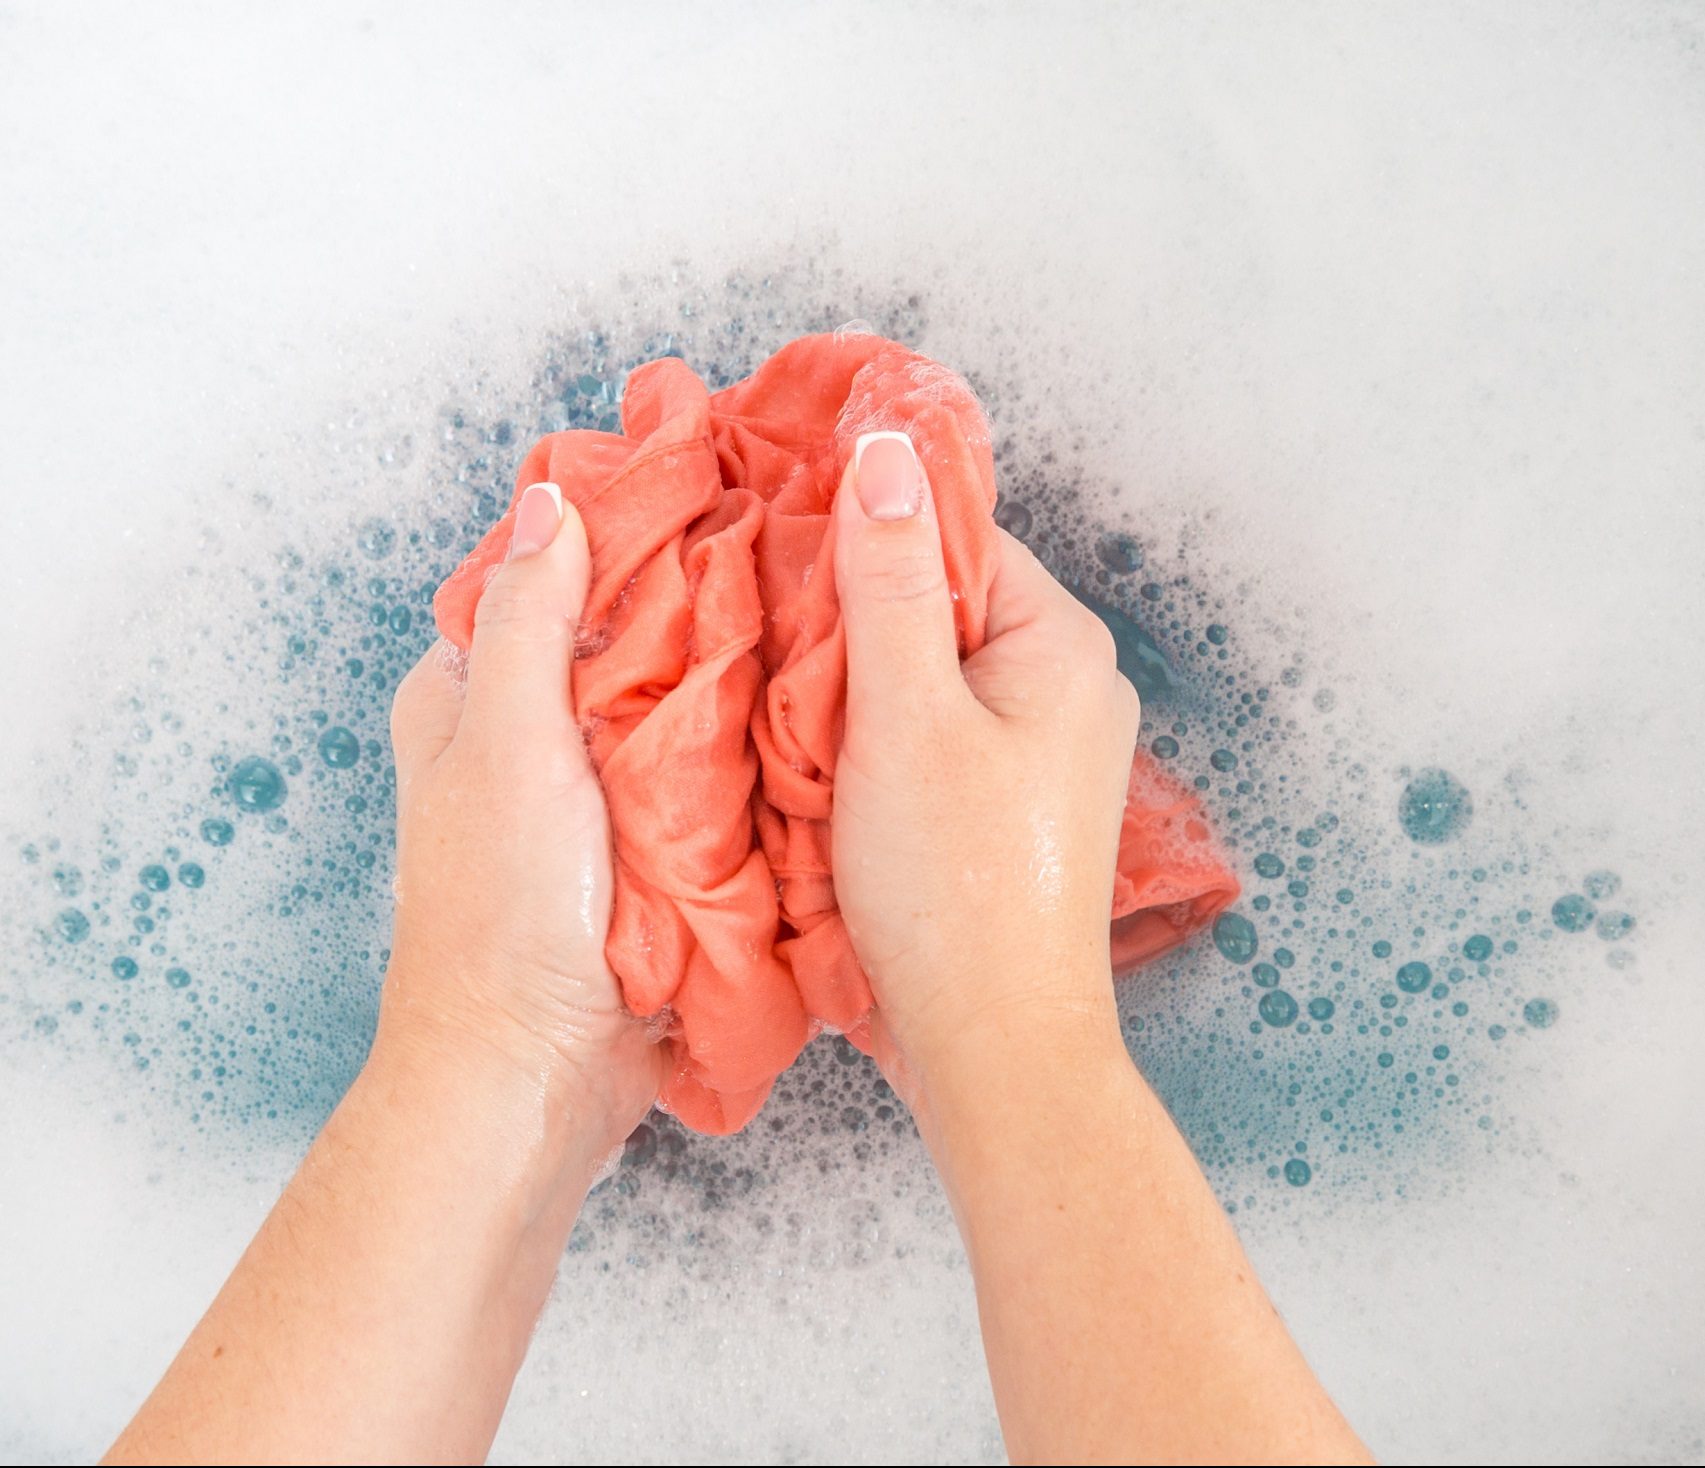 How should you actually wash your clothes by hand?